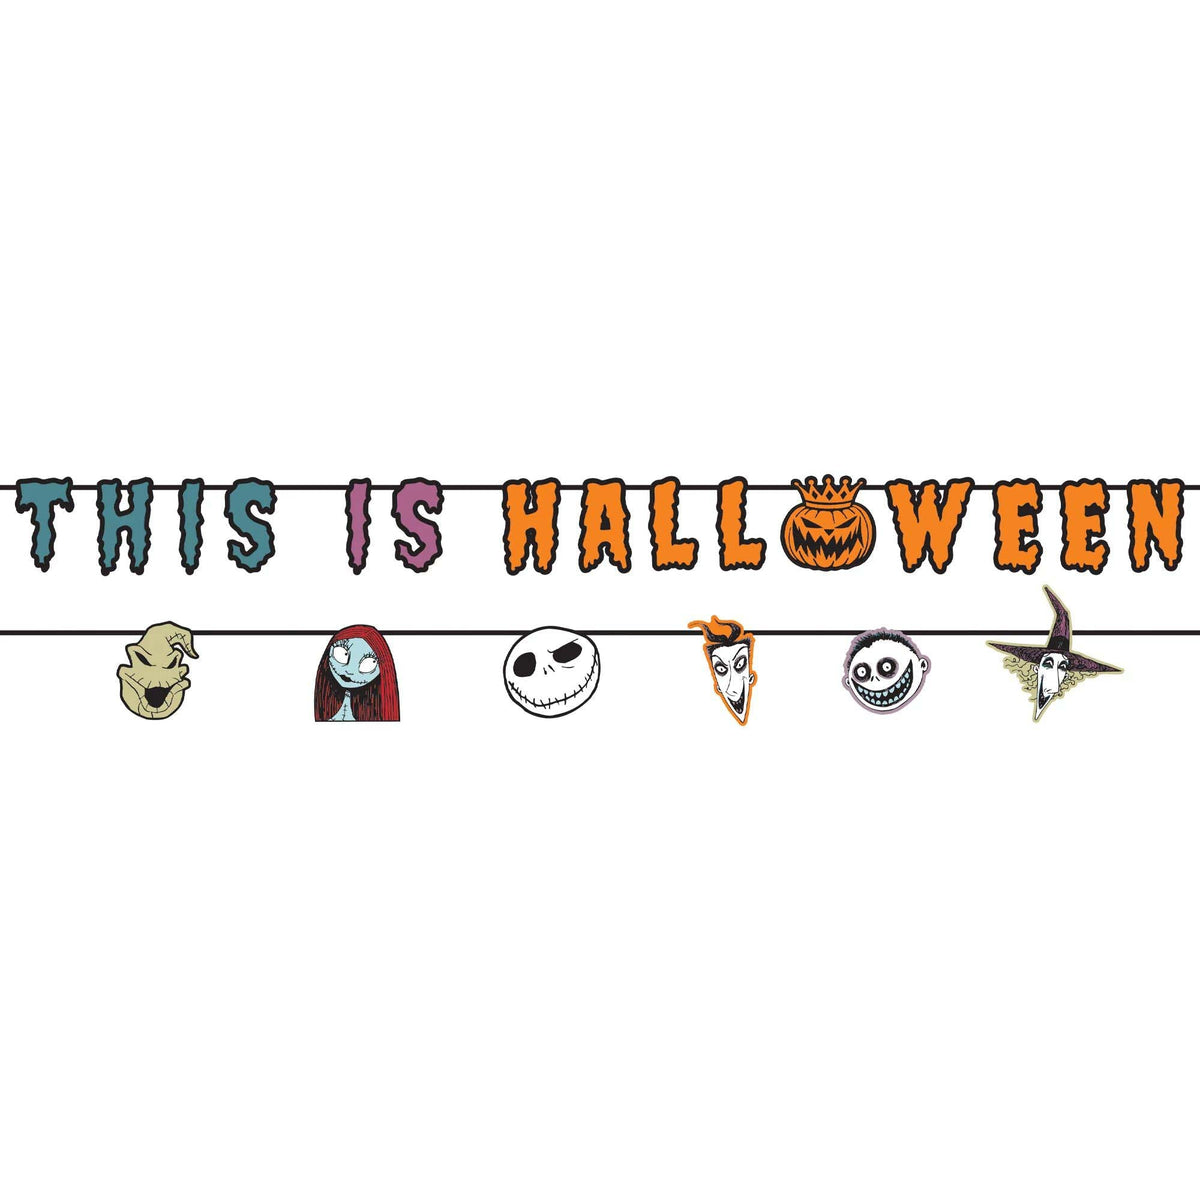 AMSCAN CA Halloween Nightmare Before Christmas "This is Halloween" Double Paper Banner, 2 Count